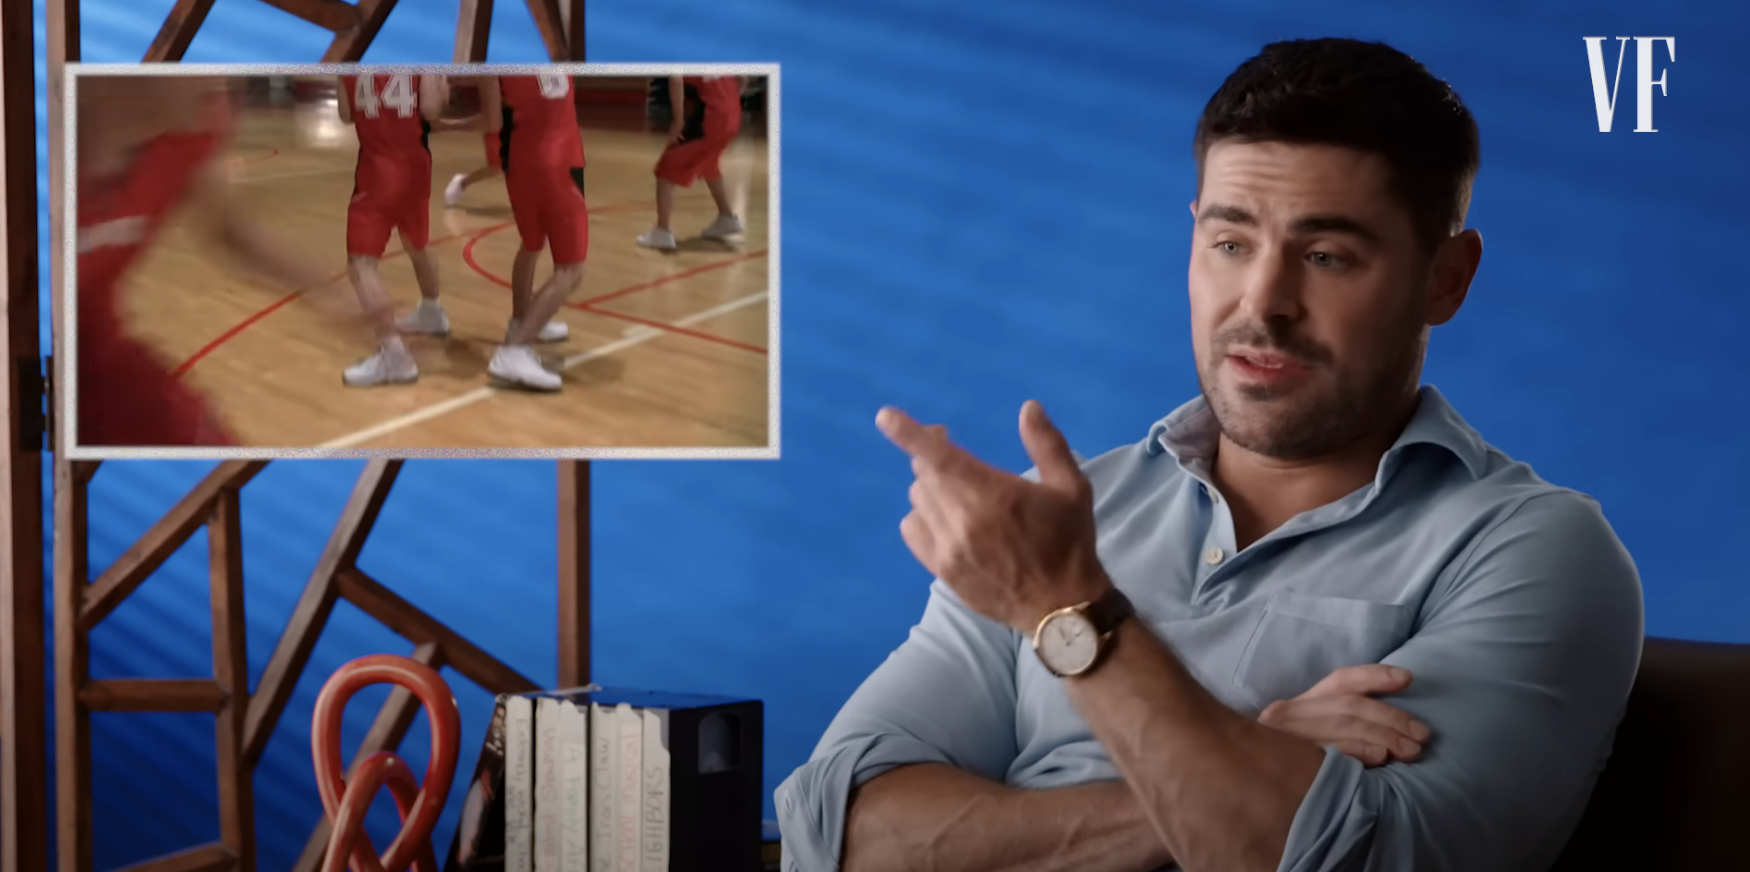 Zac Efron discusses a scene from a basketball game shown in an inset. He&#x27;s seated, wearing a light shirt, pointing to the inset image. Vanity Fair logo present